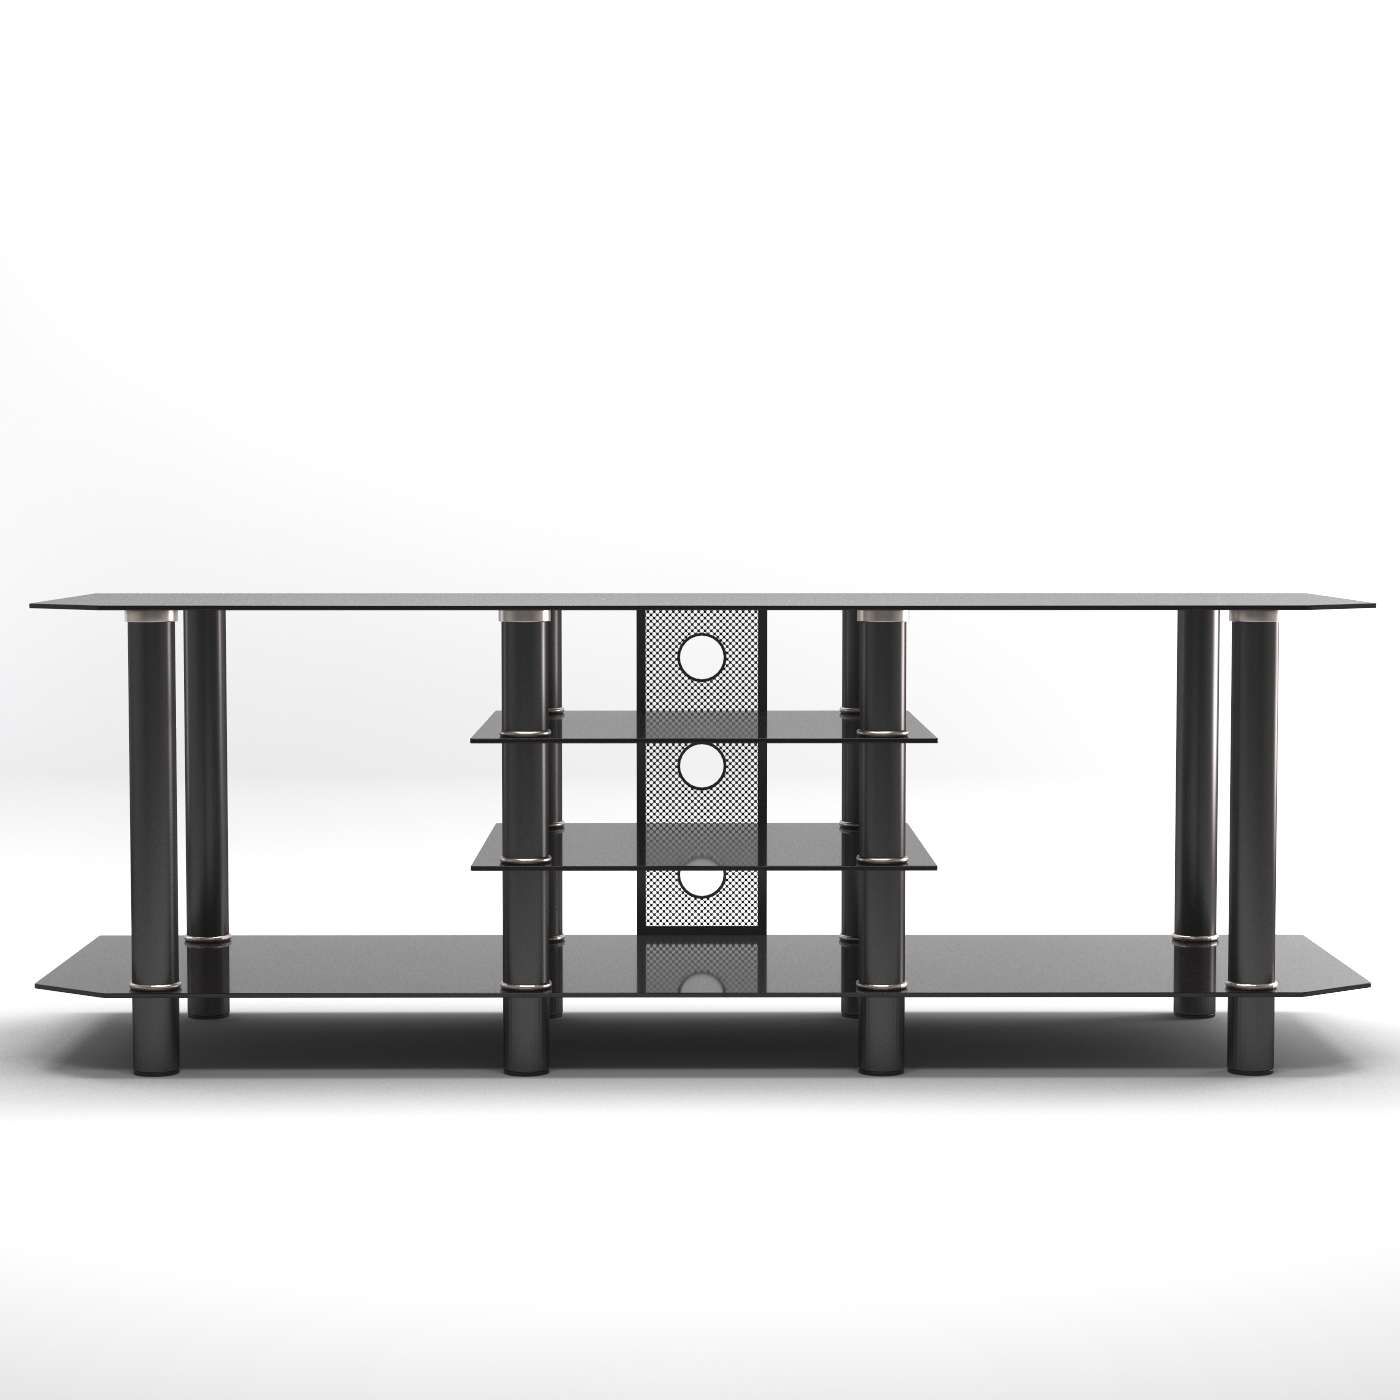 Salerno 60 Inch Glass Tv Stand In Black For Modern Glass Tv Stands (Gallery 11 of 15)